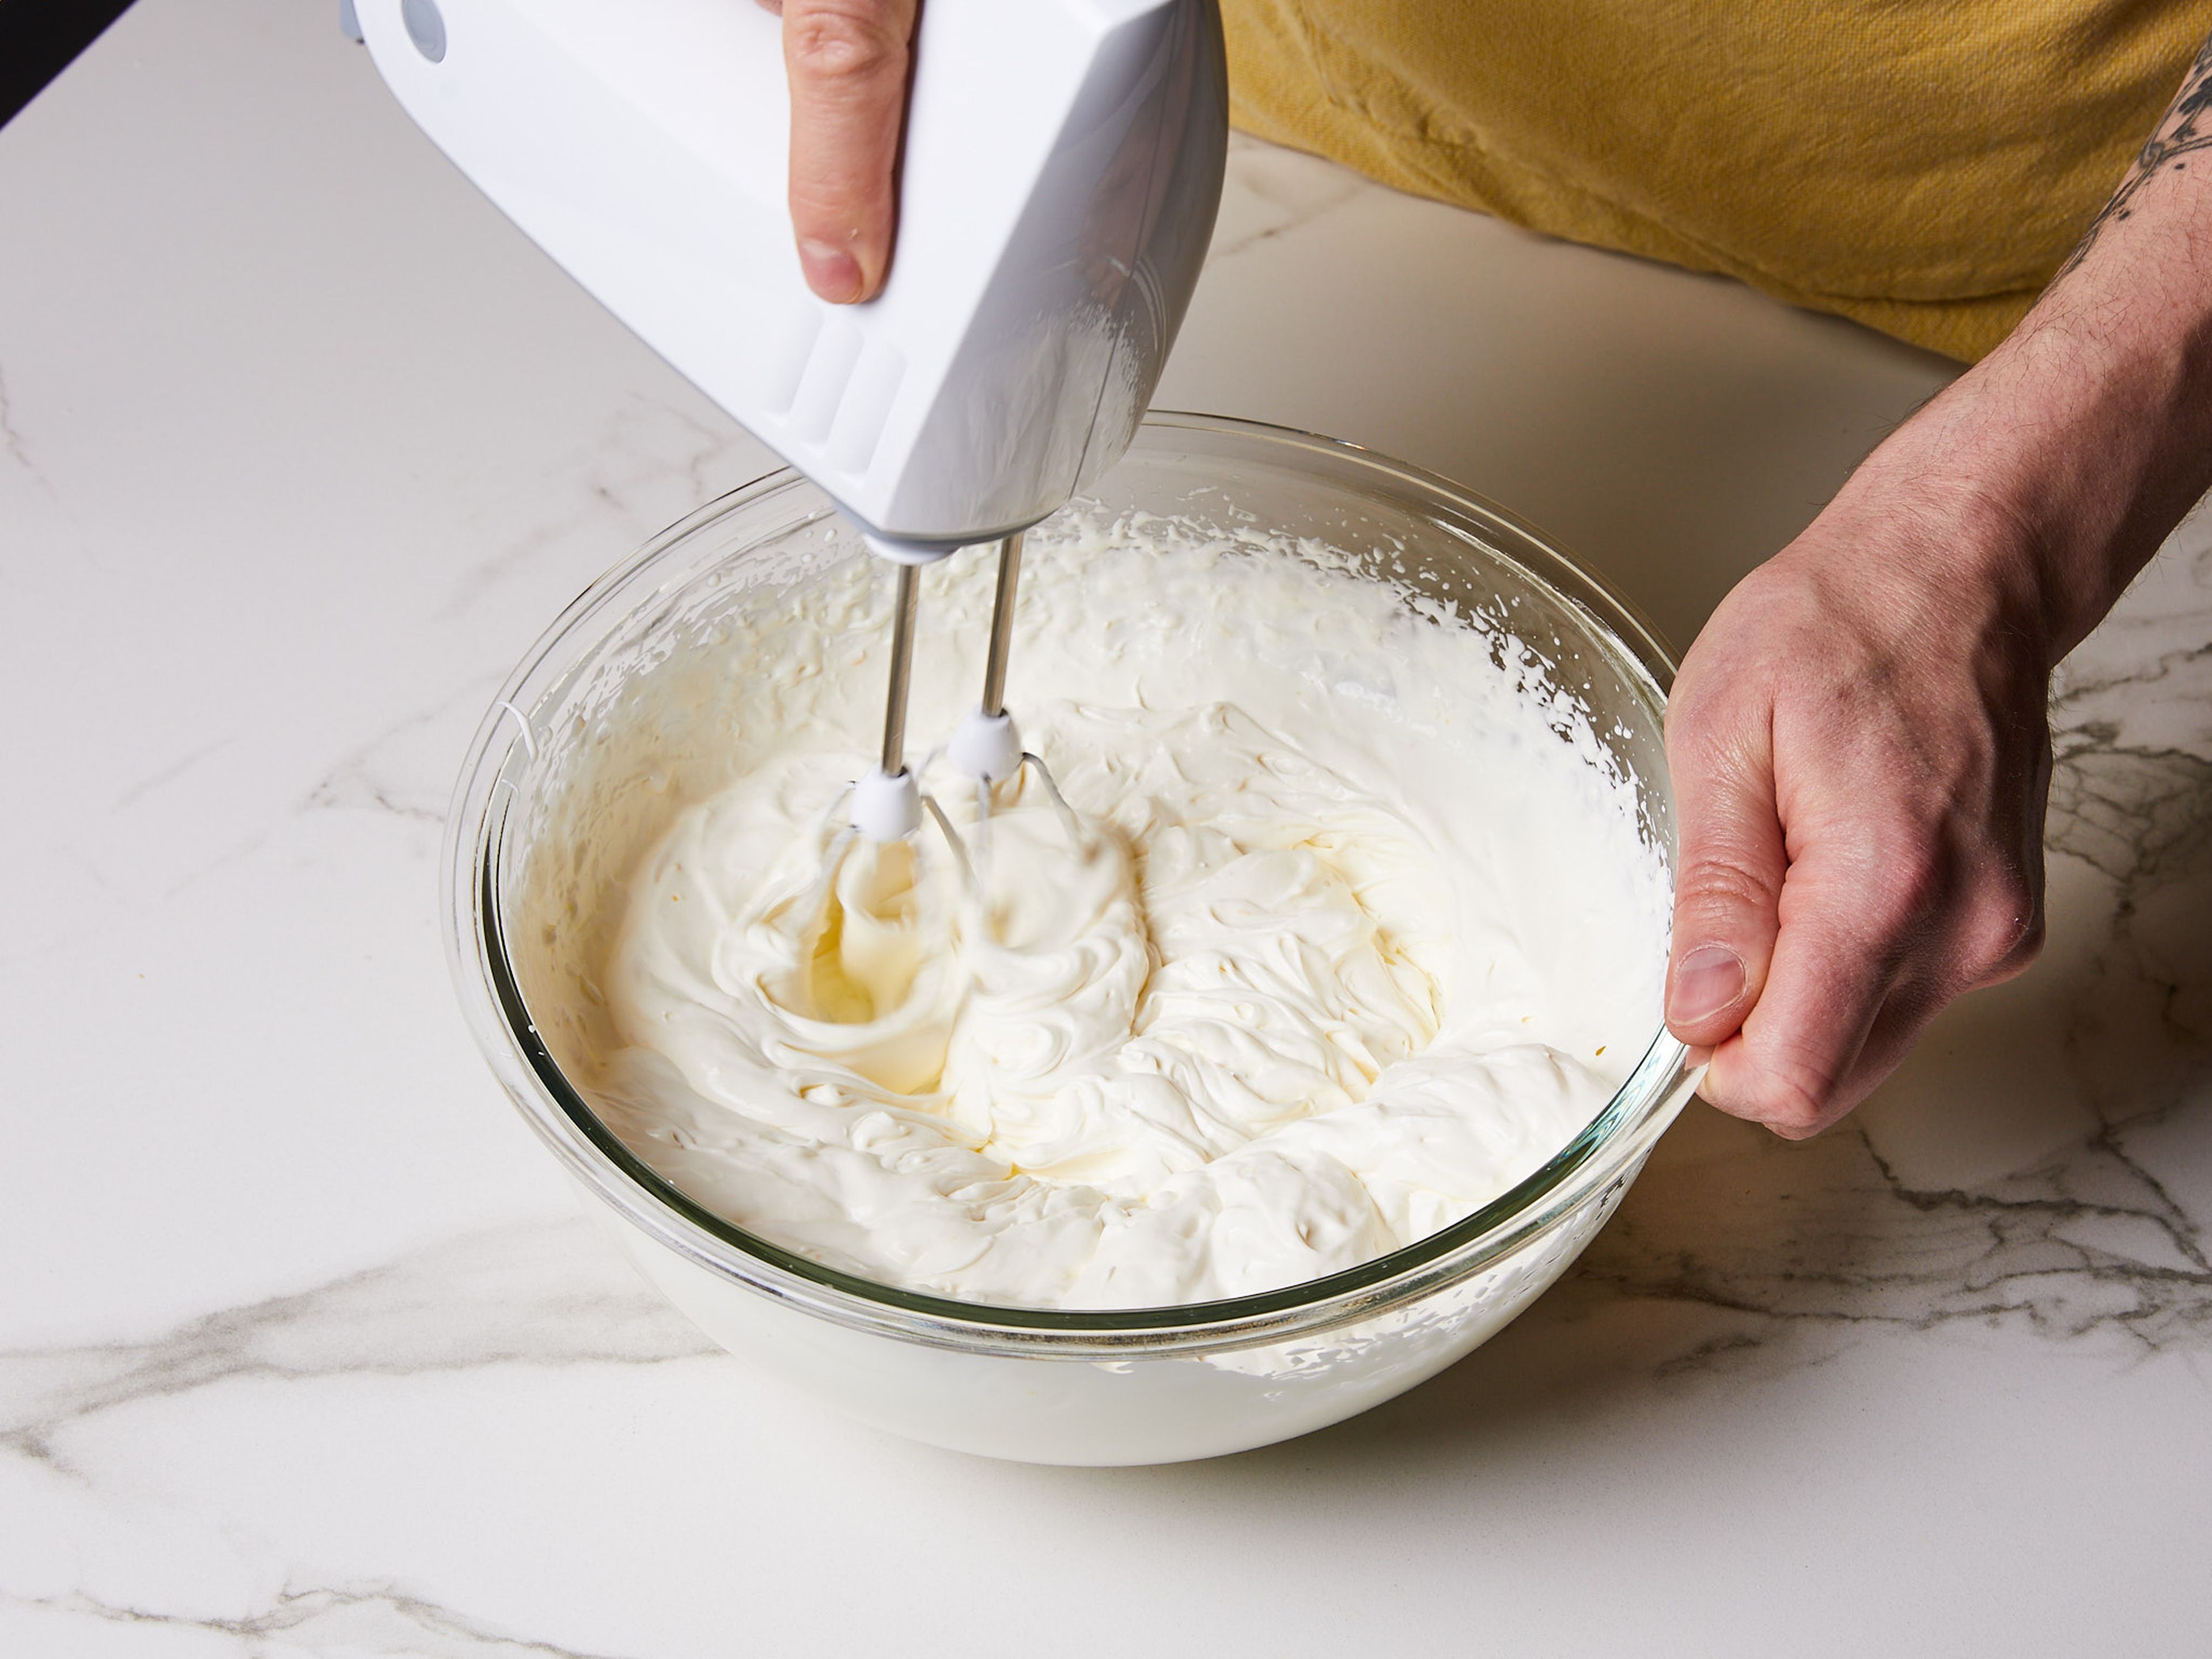 Next, finely grate the lemon zest. For the mascarpone cream, in a large bowl, combine mascarpone, lemon zest, sugar, and heavy cream. Whip until stiff and fluffy with a hand mixer.